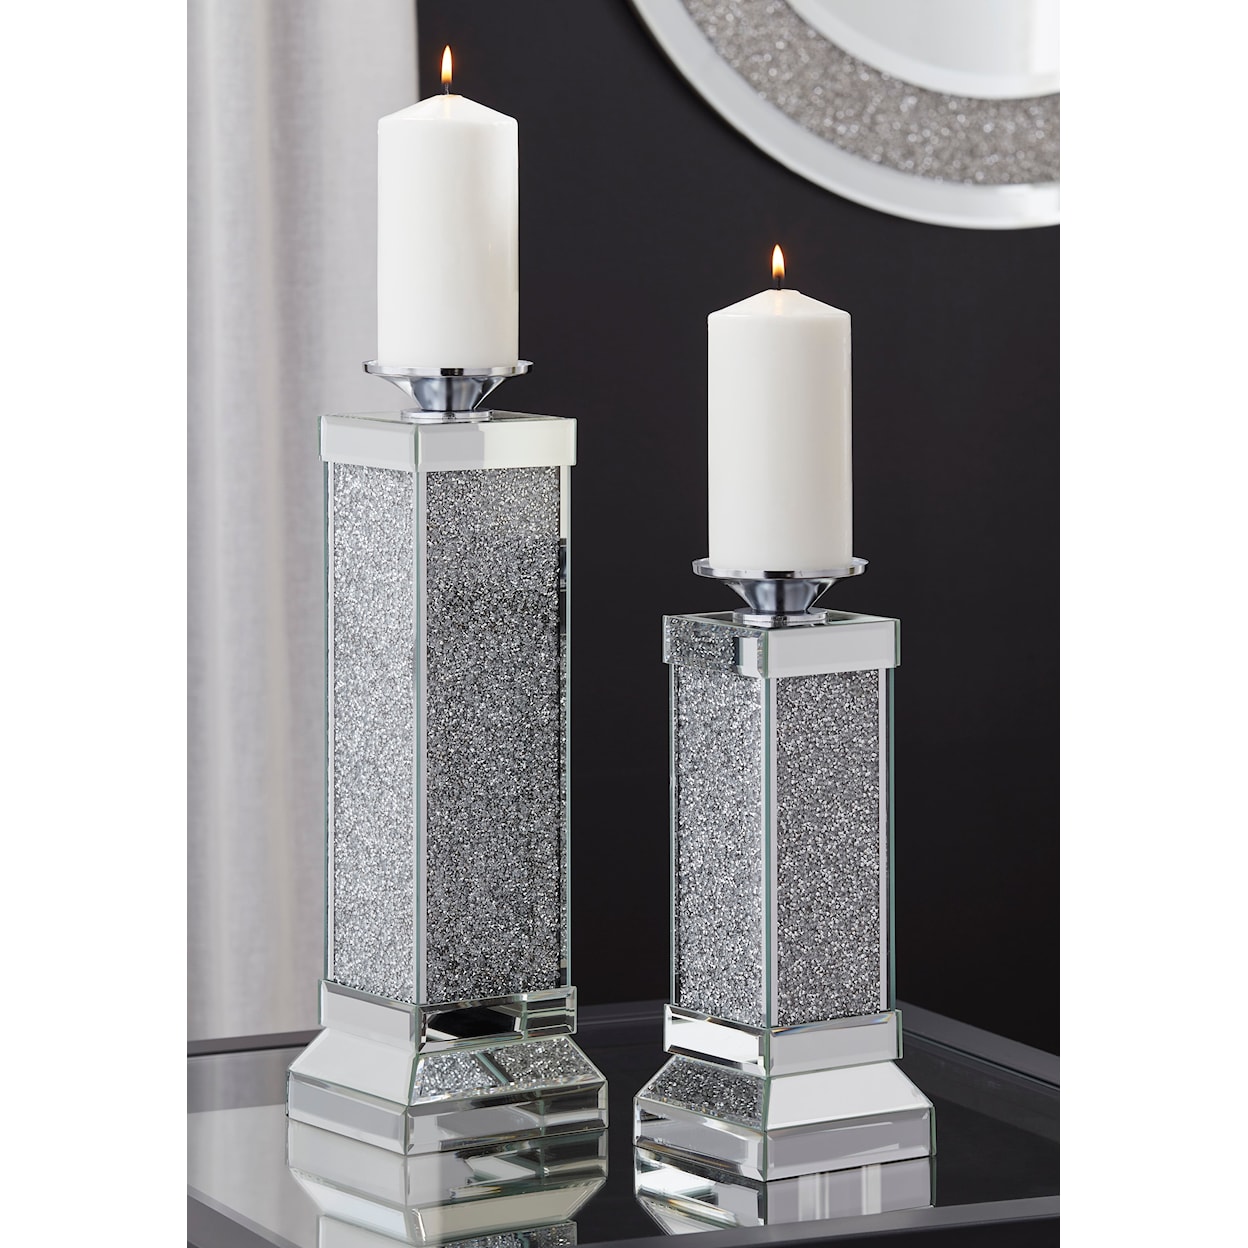 Signature Design by Ashley Accents Charline Candle Holder (Set of 2)